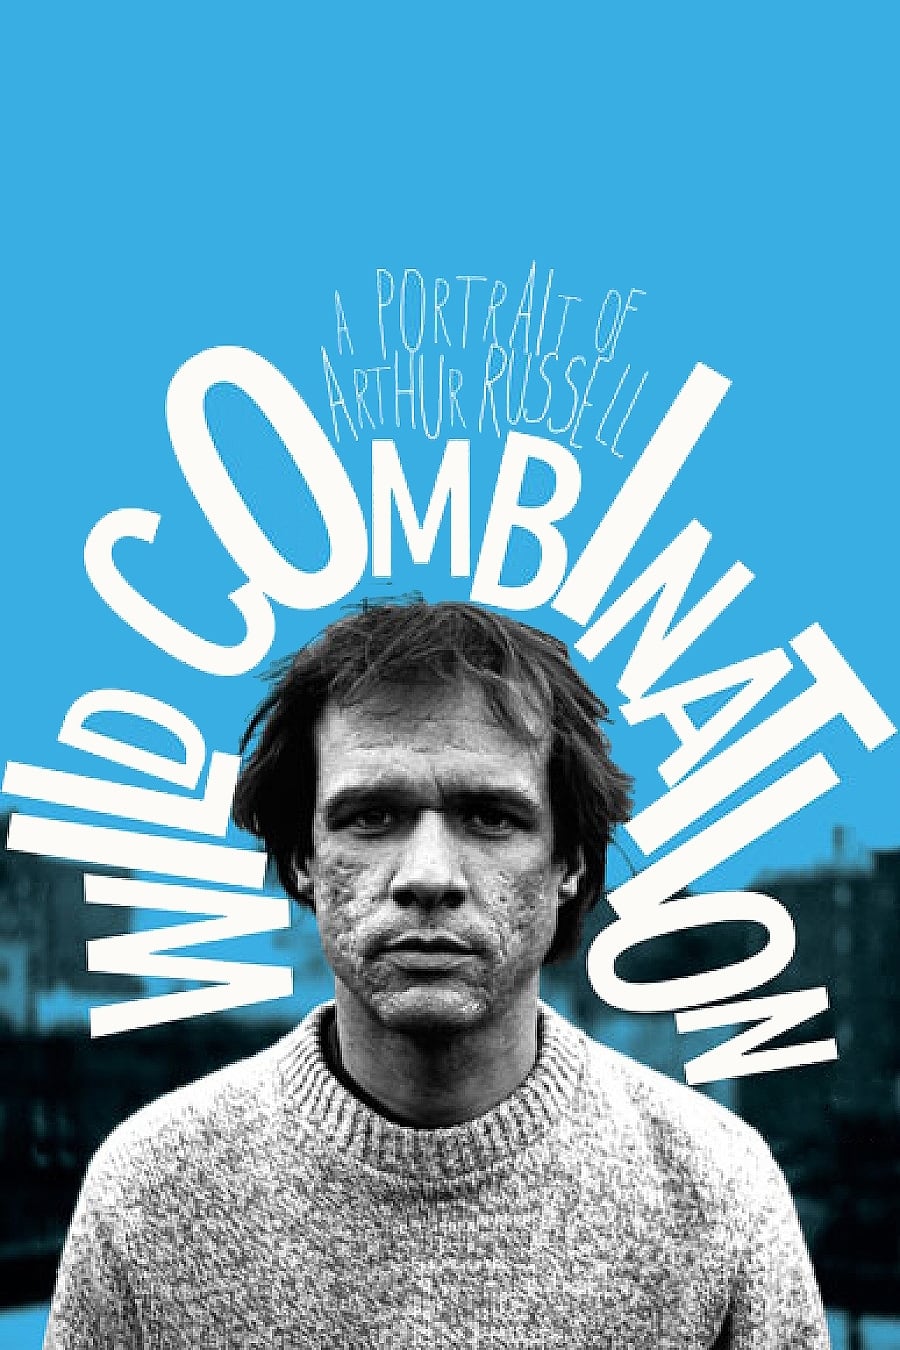 Wild Combination: A Portrait of Arthur Russell (2008)